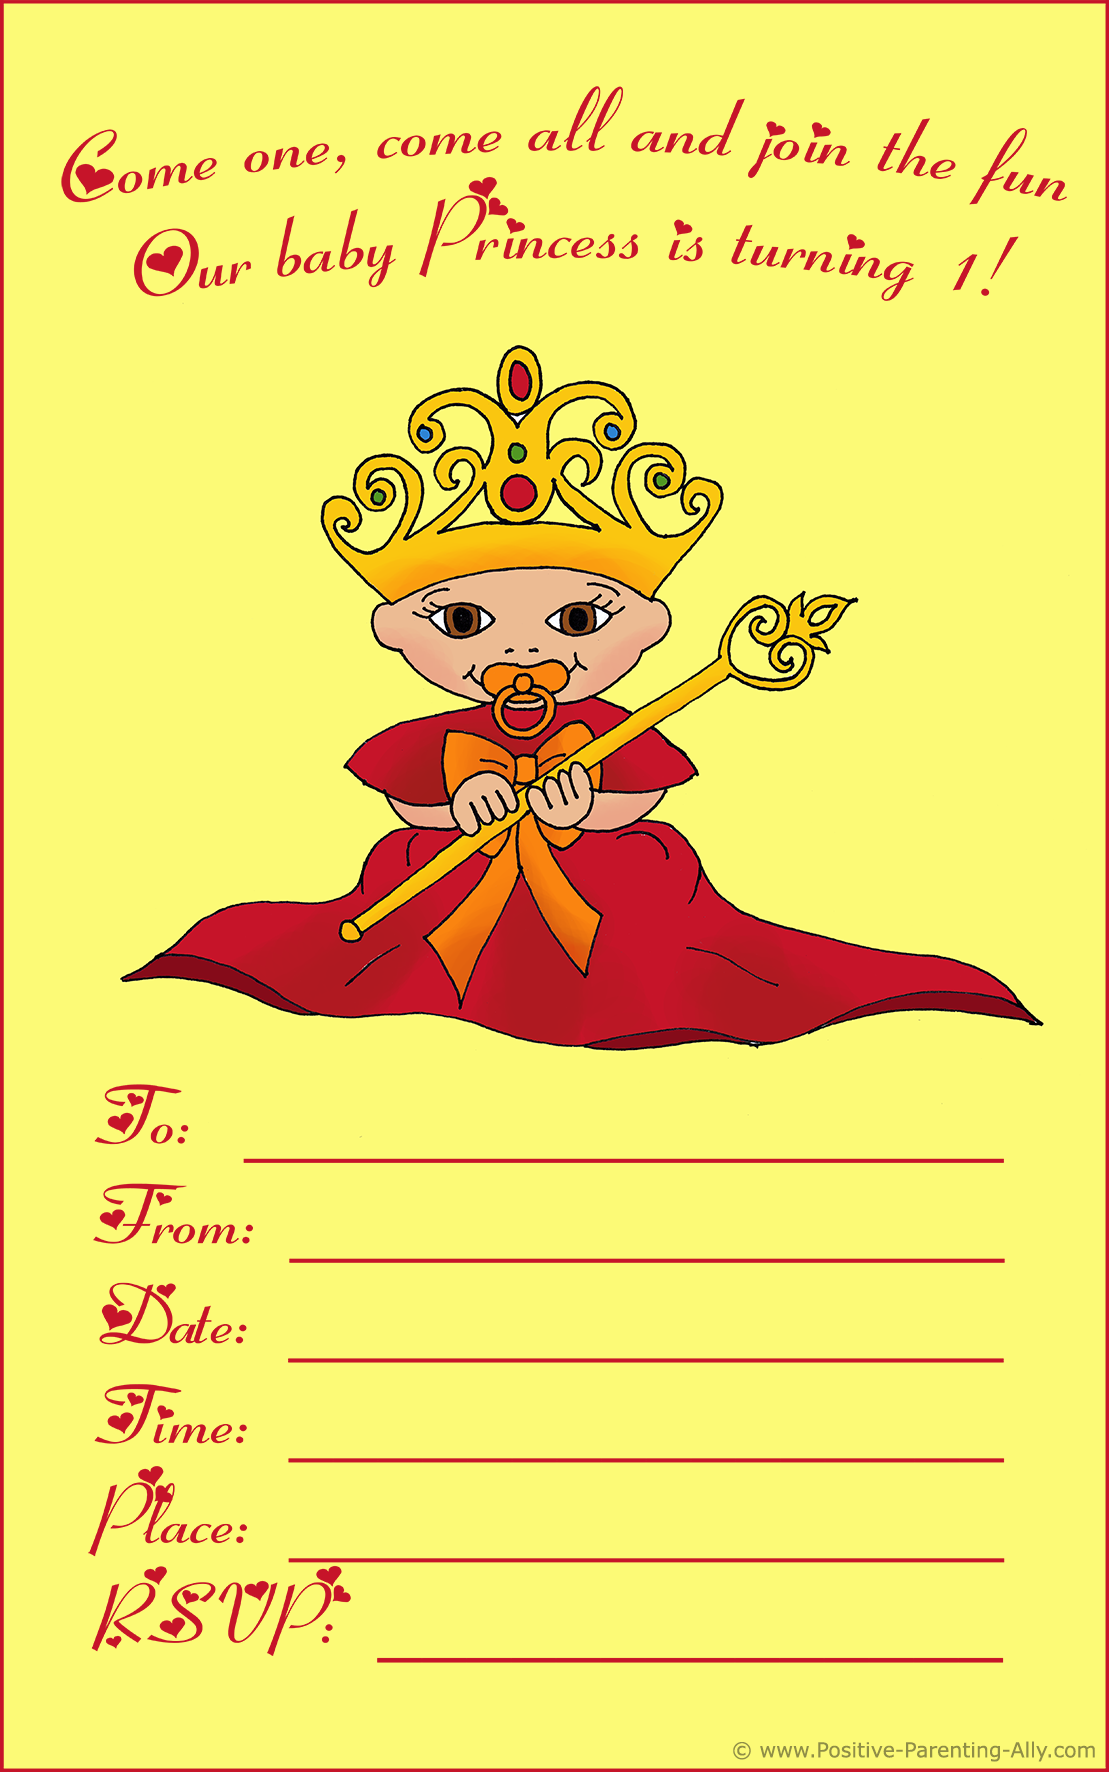 Printable birthday invite featuring a baby princess wearing a queen's robe and crown.